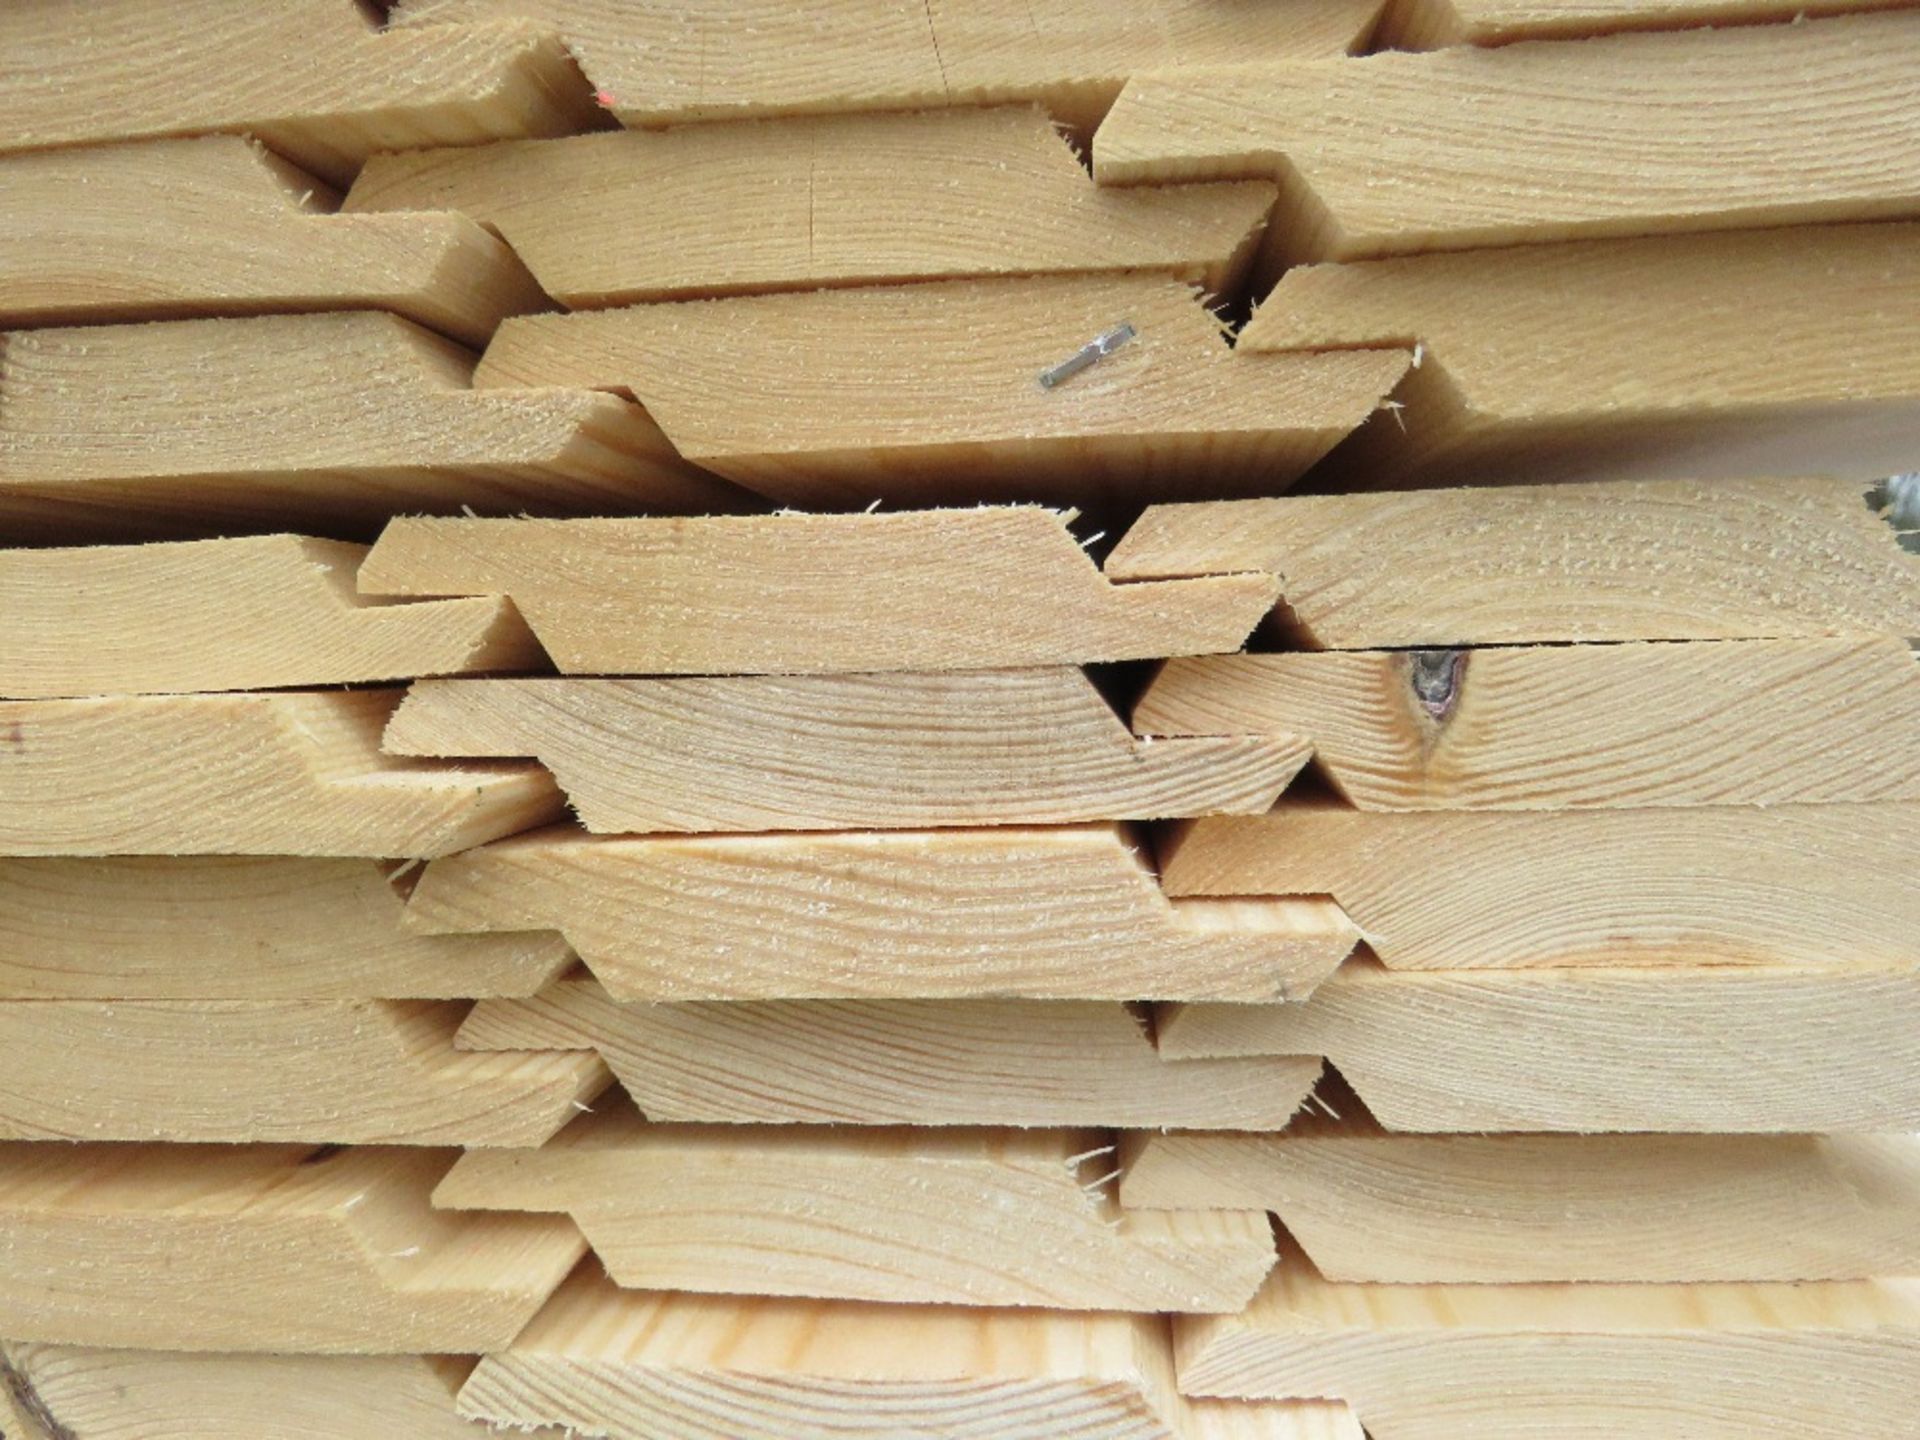 3 X PACKS OF UNTREATED SHIPLAP TYPE "Z" BOARD TIMBER FENCE CLADDING BOARDS: 100MM WIDTH @ 1.7M LENGT - Image 3 of 11